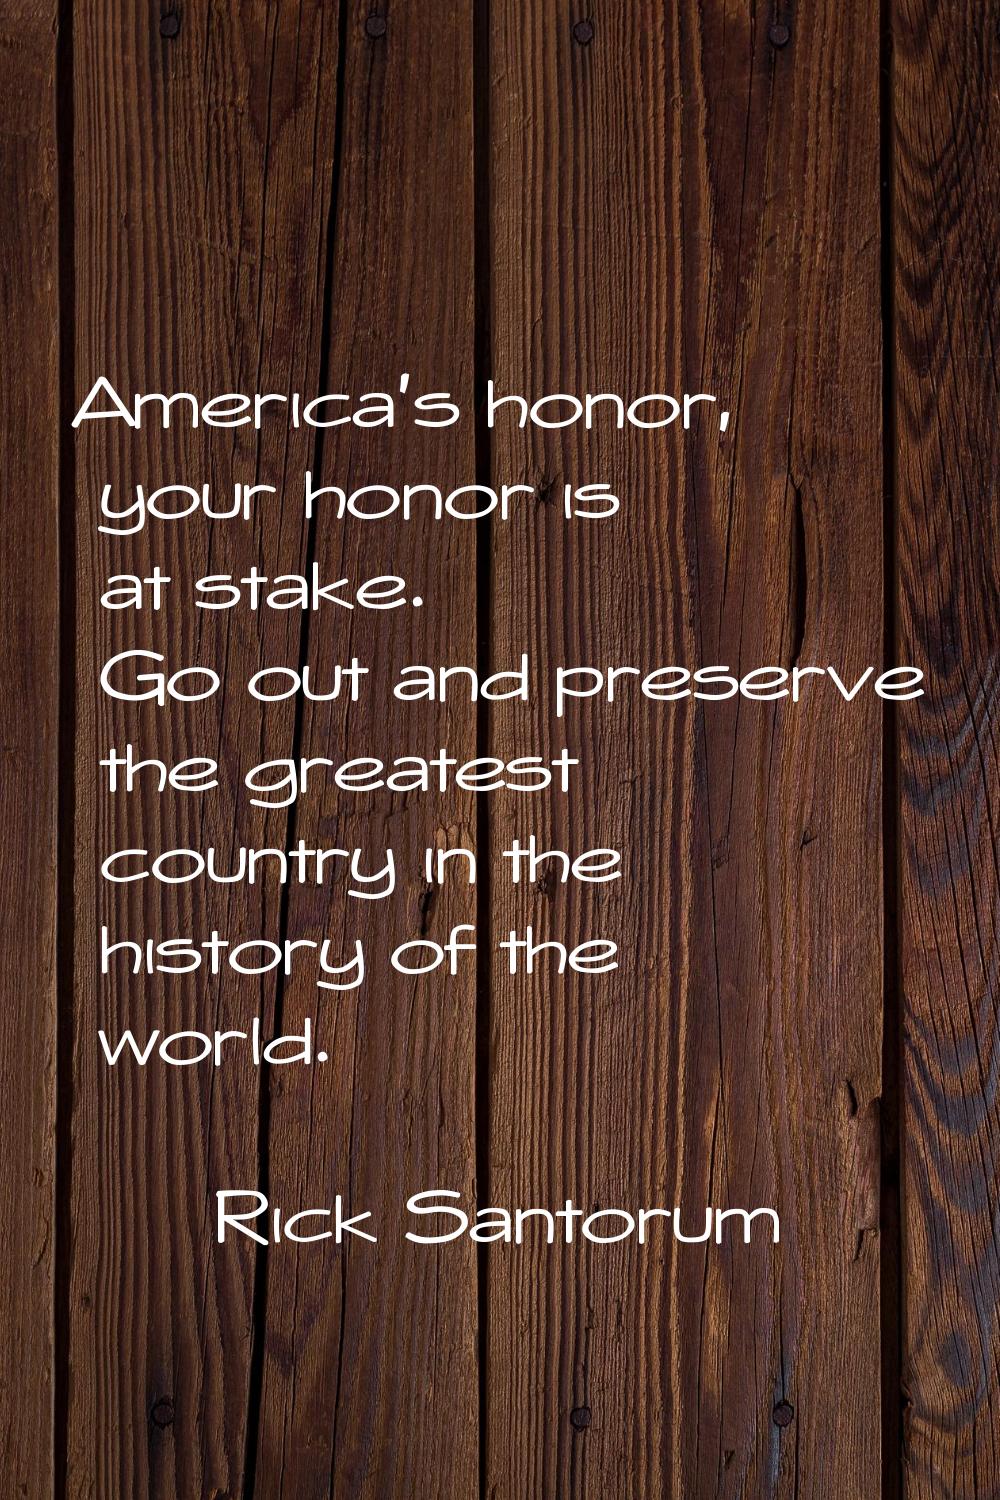 America's honor, your honor is at stake. Go out and preserve the greatest country in the history of